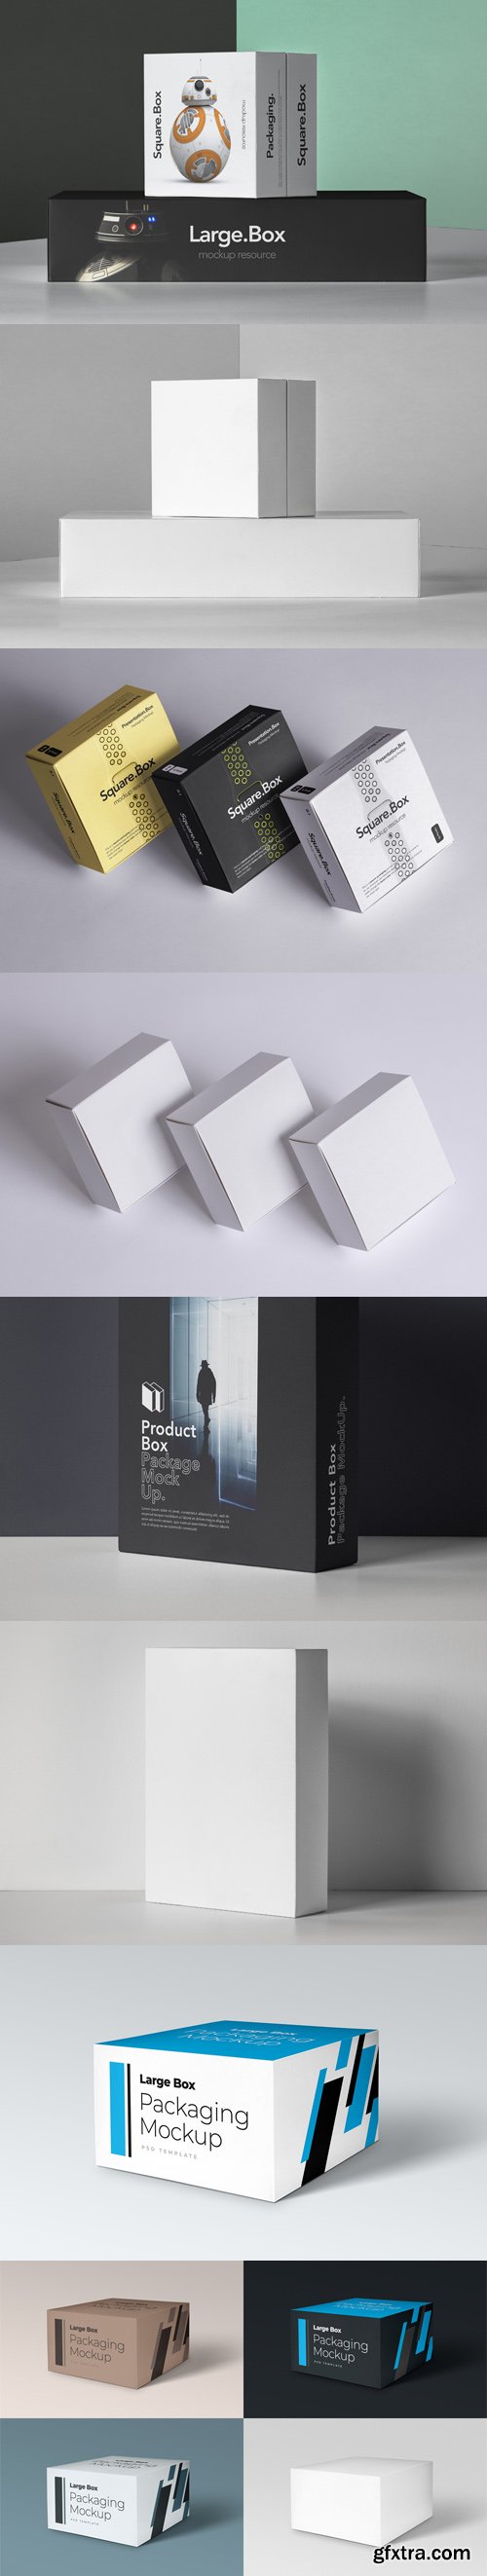 4 Product Boxes Packaging PSD Mockups Collection